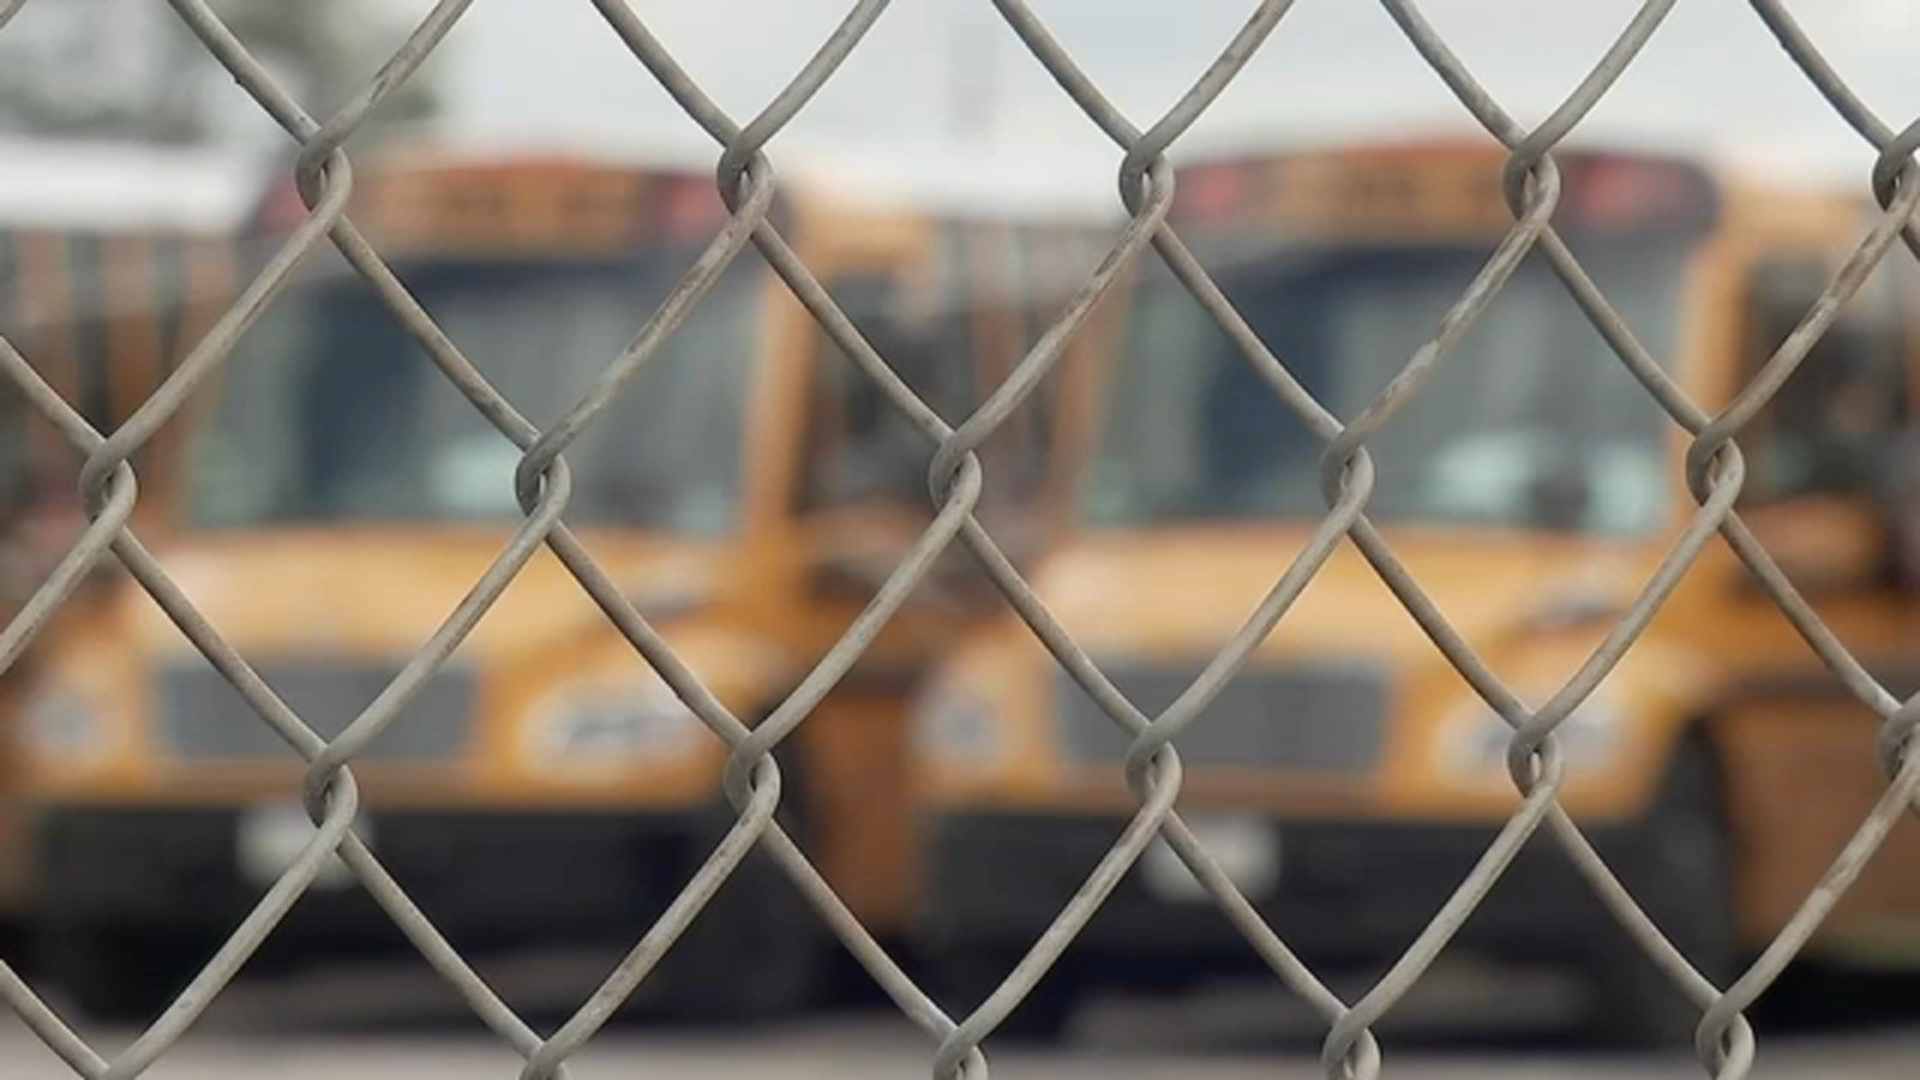 Sex Bus School Girel Forced Rape Videos - Aldine ISD elementary student repeatedly raped on school bus by older boy,  6-year-old's mother says - ABC13 Houston